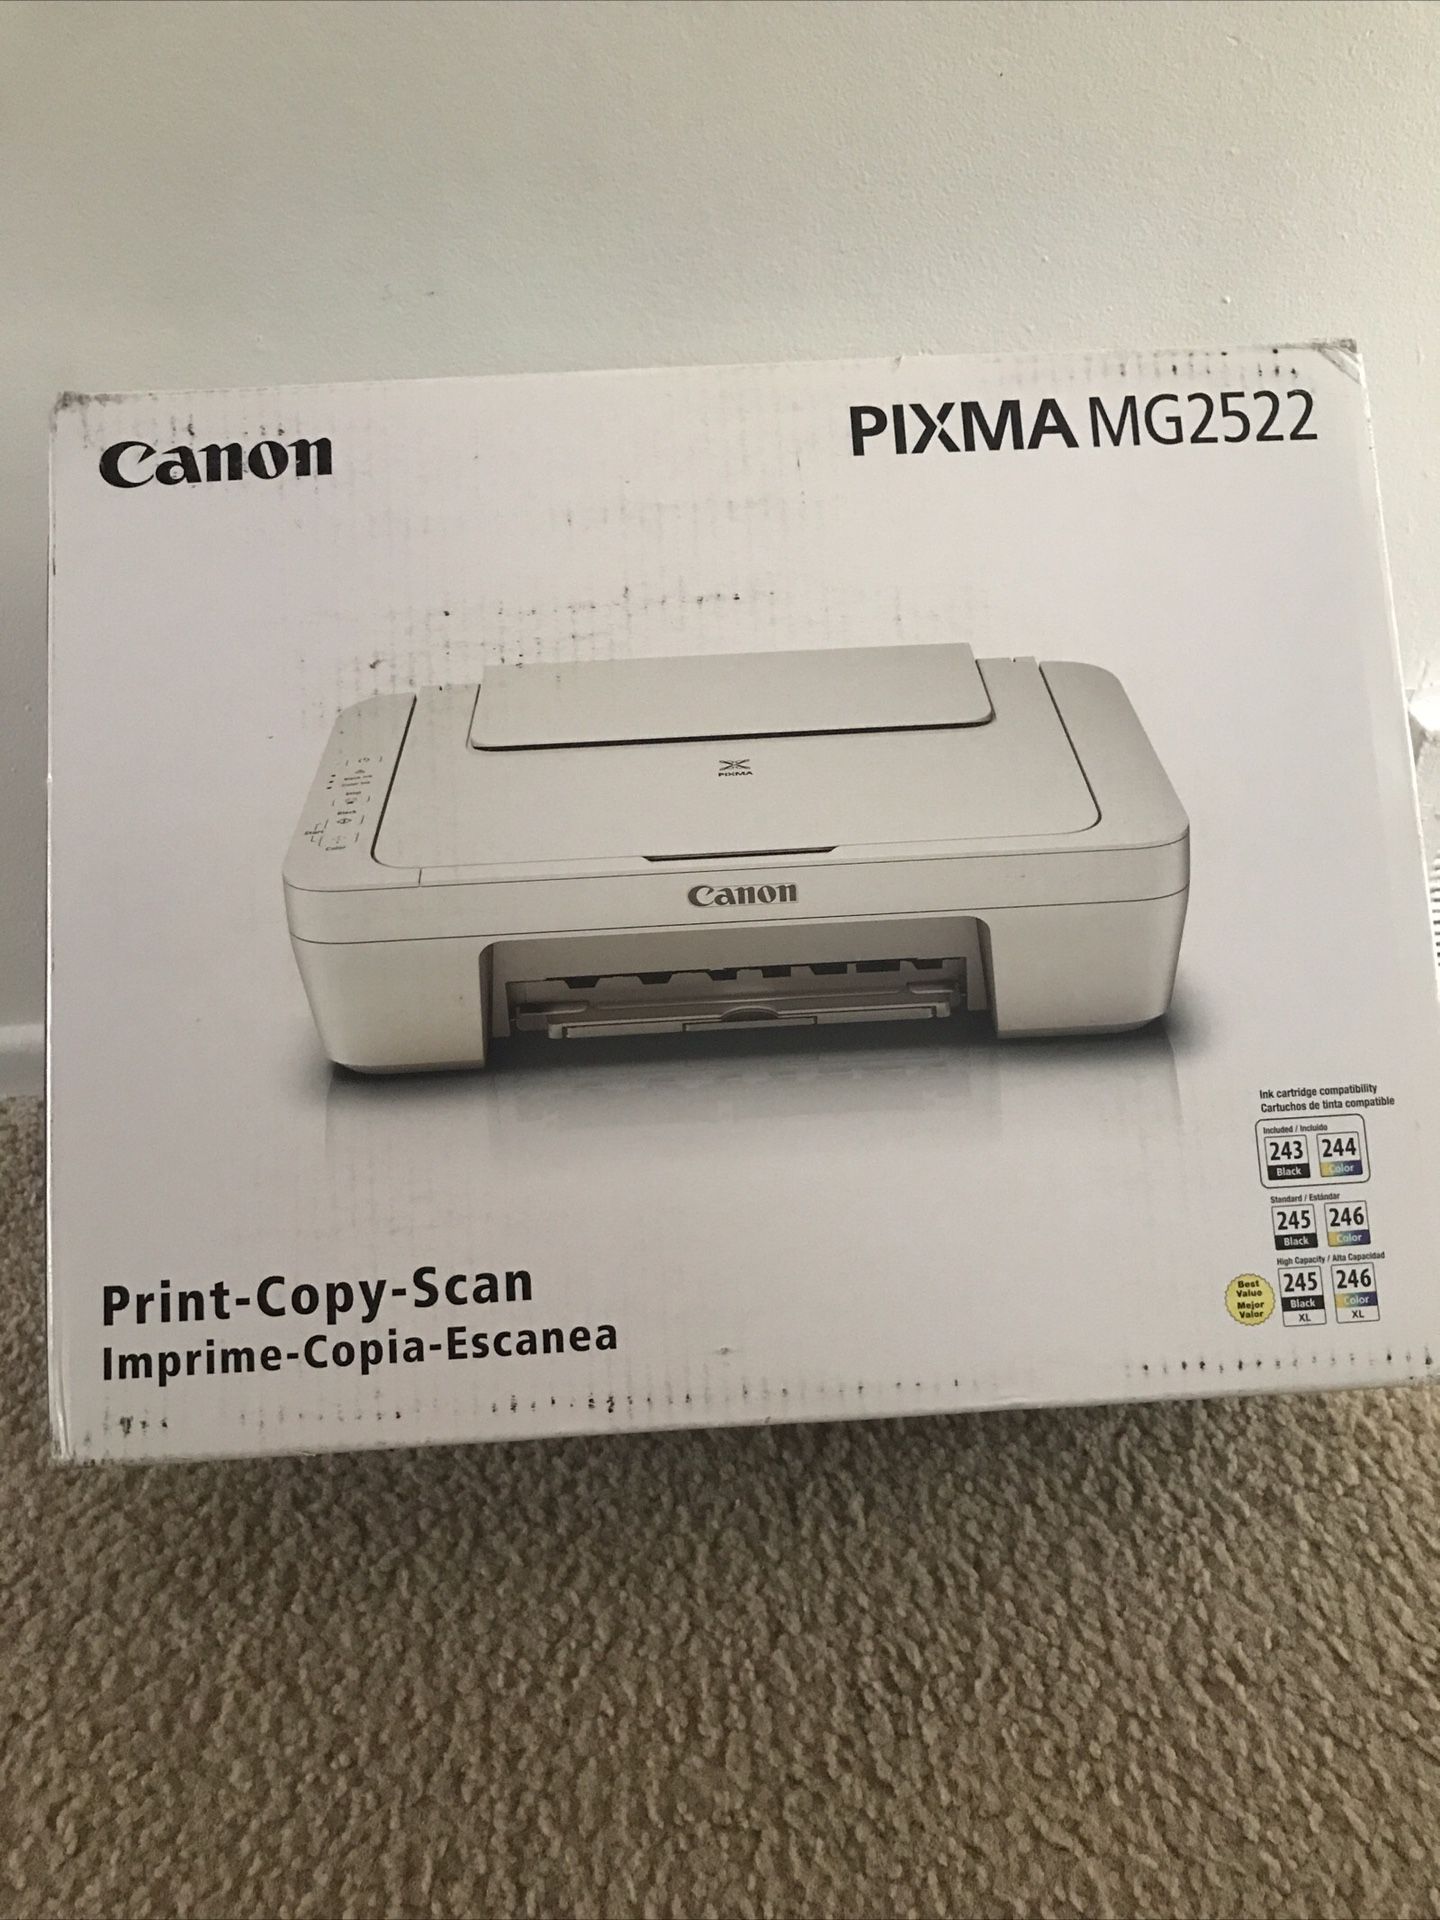  Open Box Canon PIXAMG2522 All in One print - Copy-Scan 